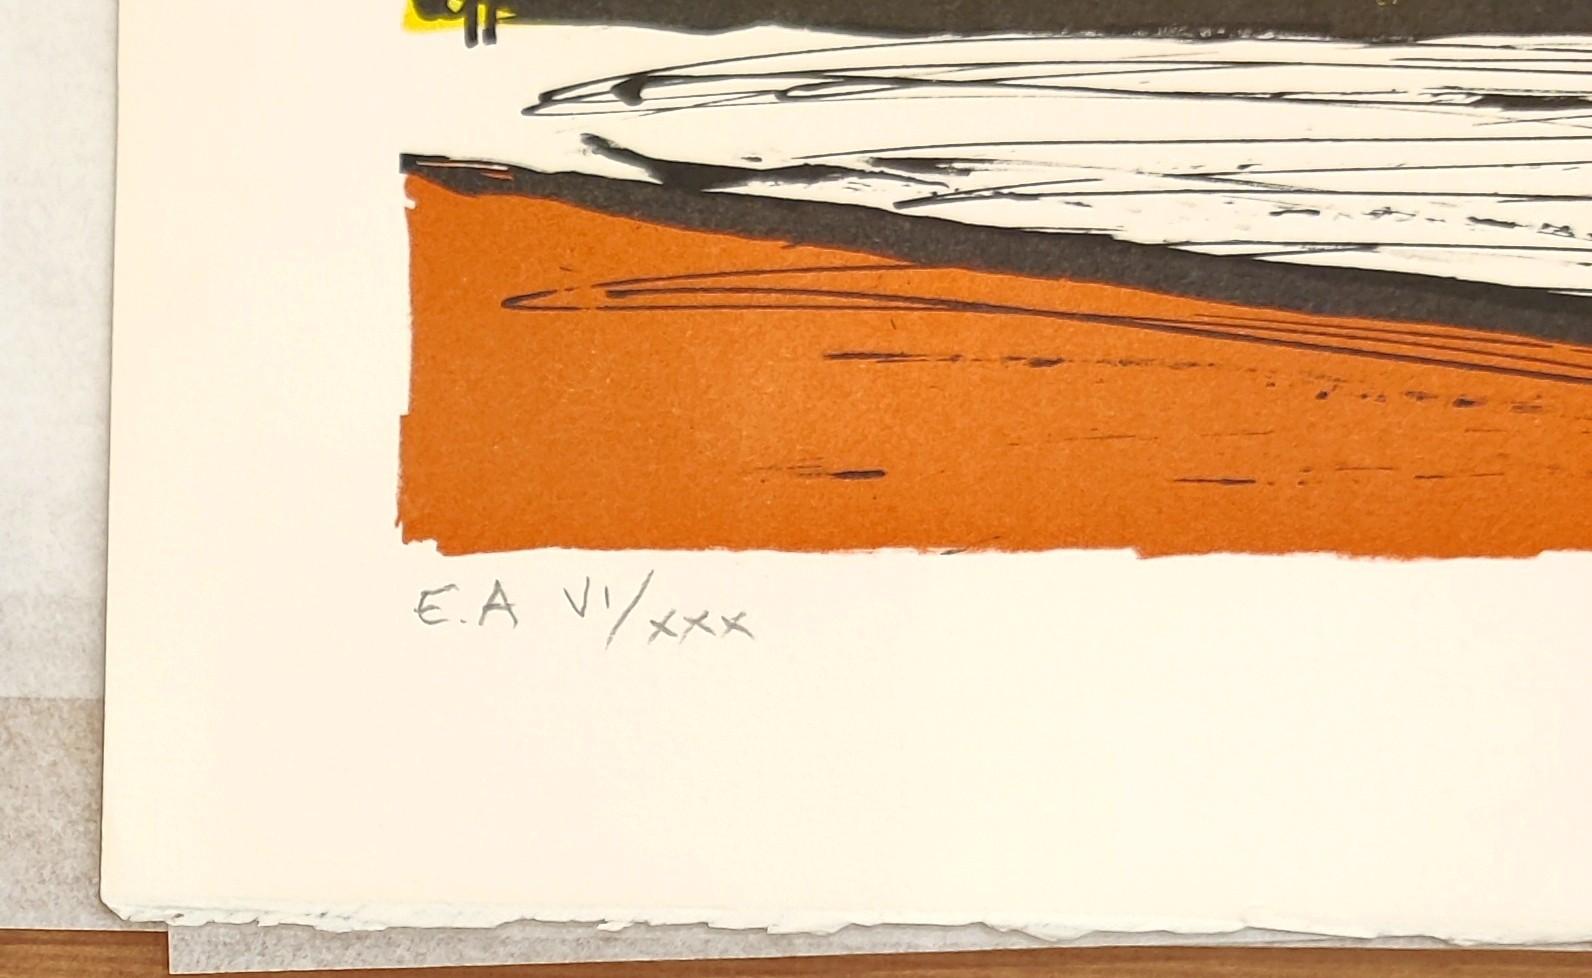 Lithograph, 1990
Handsigned by the artist in pencil and annotated EA
Artist proof
Edition : EA VII/XXX
Catalog : Sorlier 524
76.00 cm. x 58.00 cm.  29.92 in. x 22.83 in. (paper)
67.00 cm. x 50.50 cm.  26.38 in. x 19.88 in. (image)

An attractive